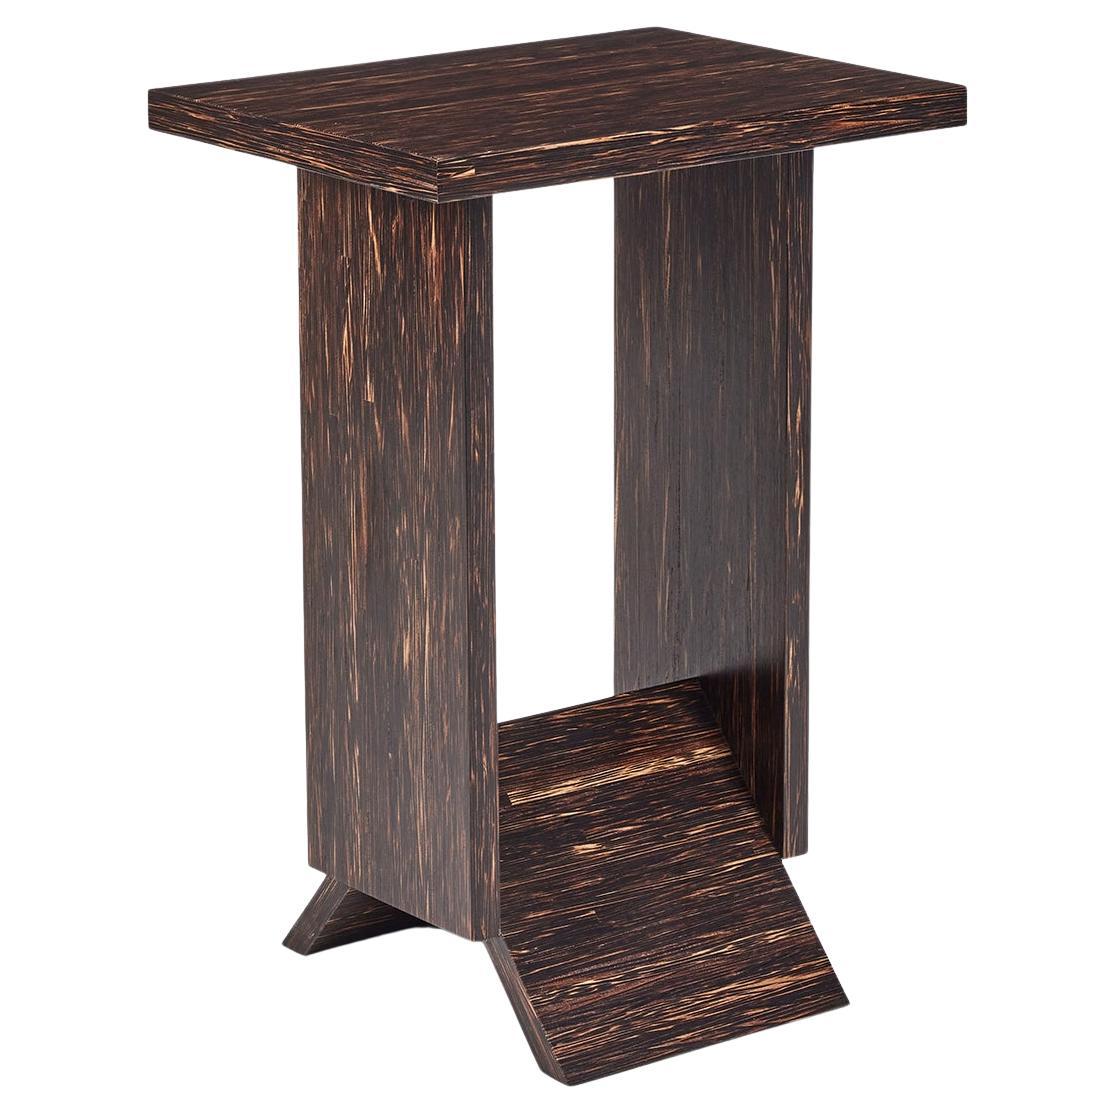 'Hotel de Tour' Palm Wood Side Table in the Manner of Pierre Chareau